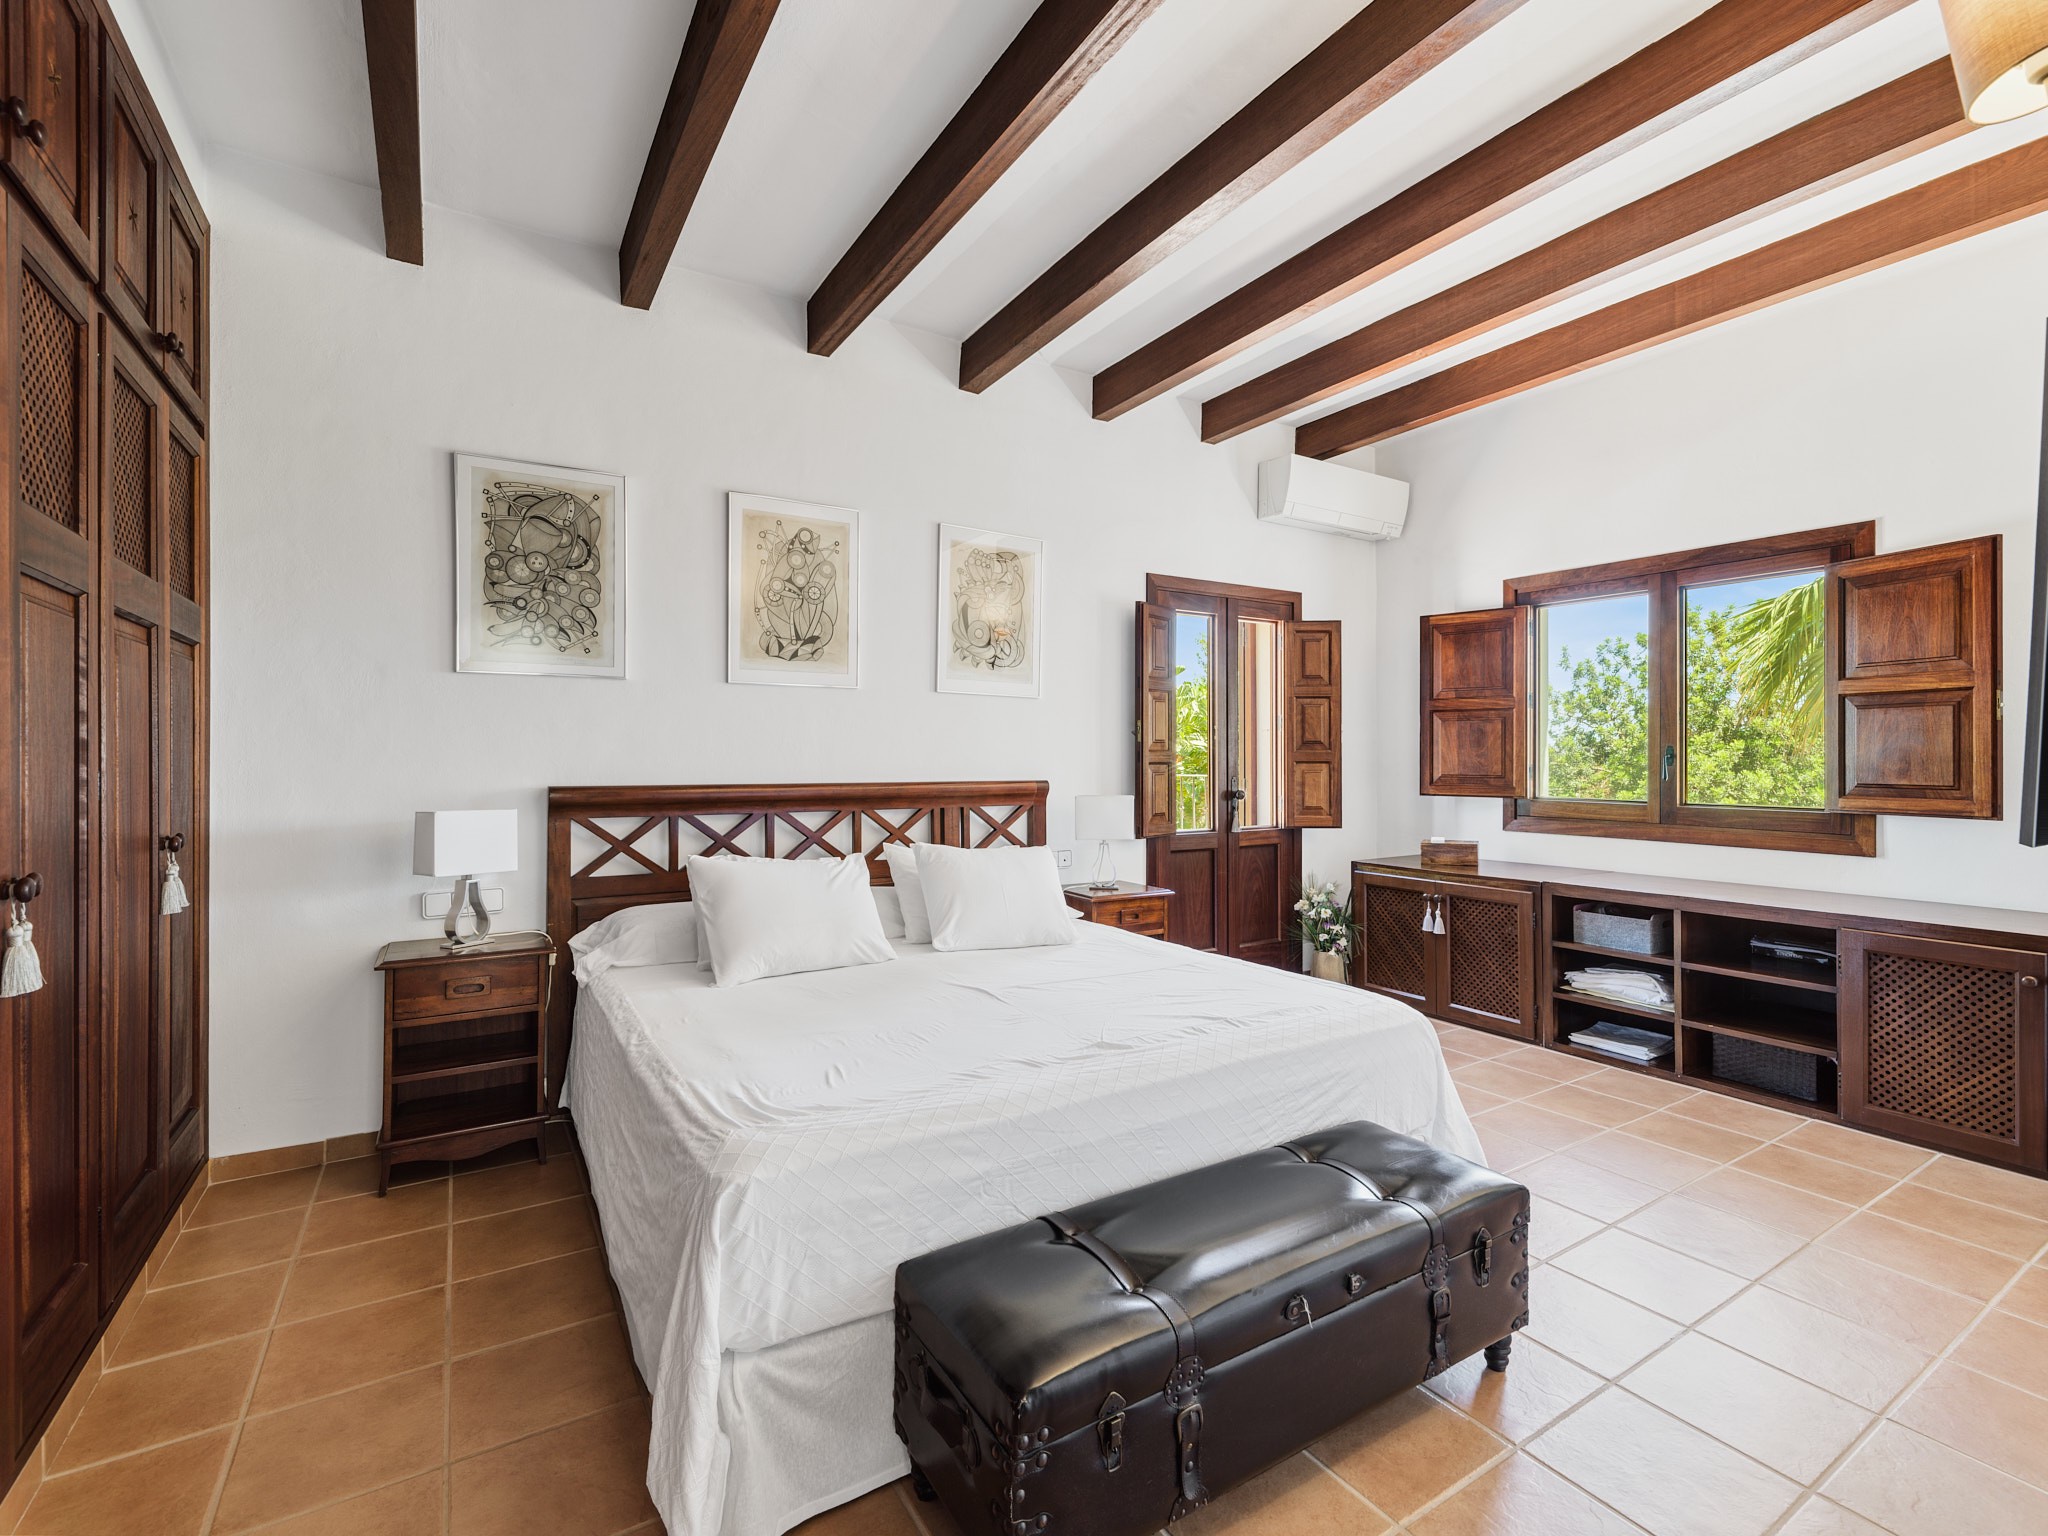 Perfectly maintained finca-style villa in central location - 15